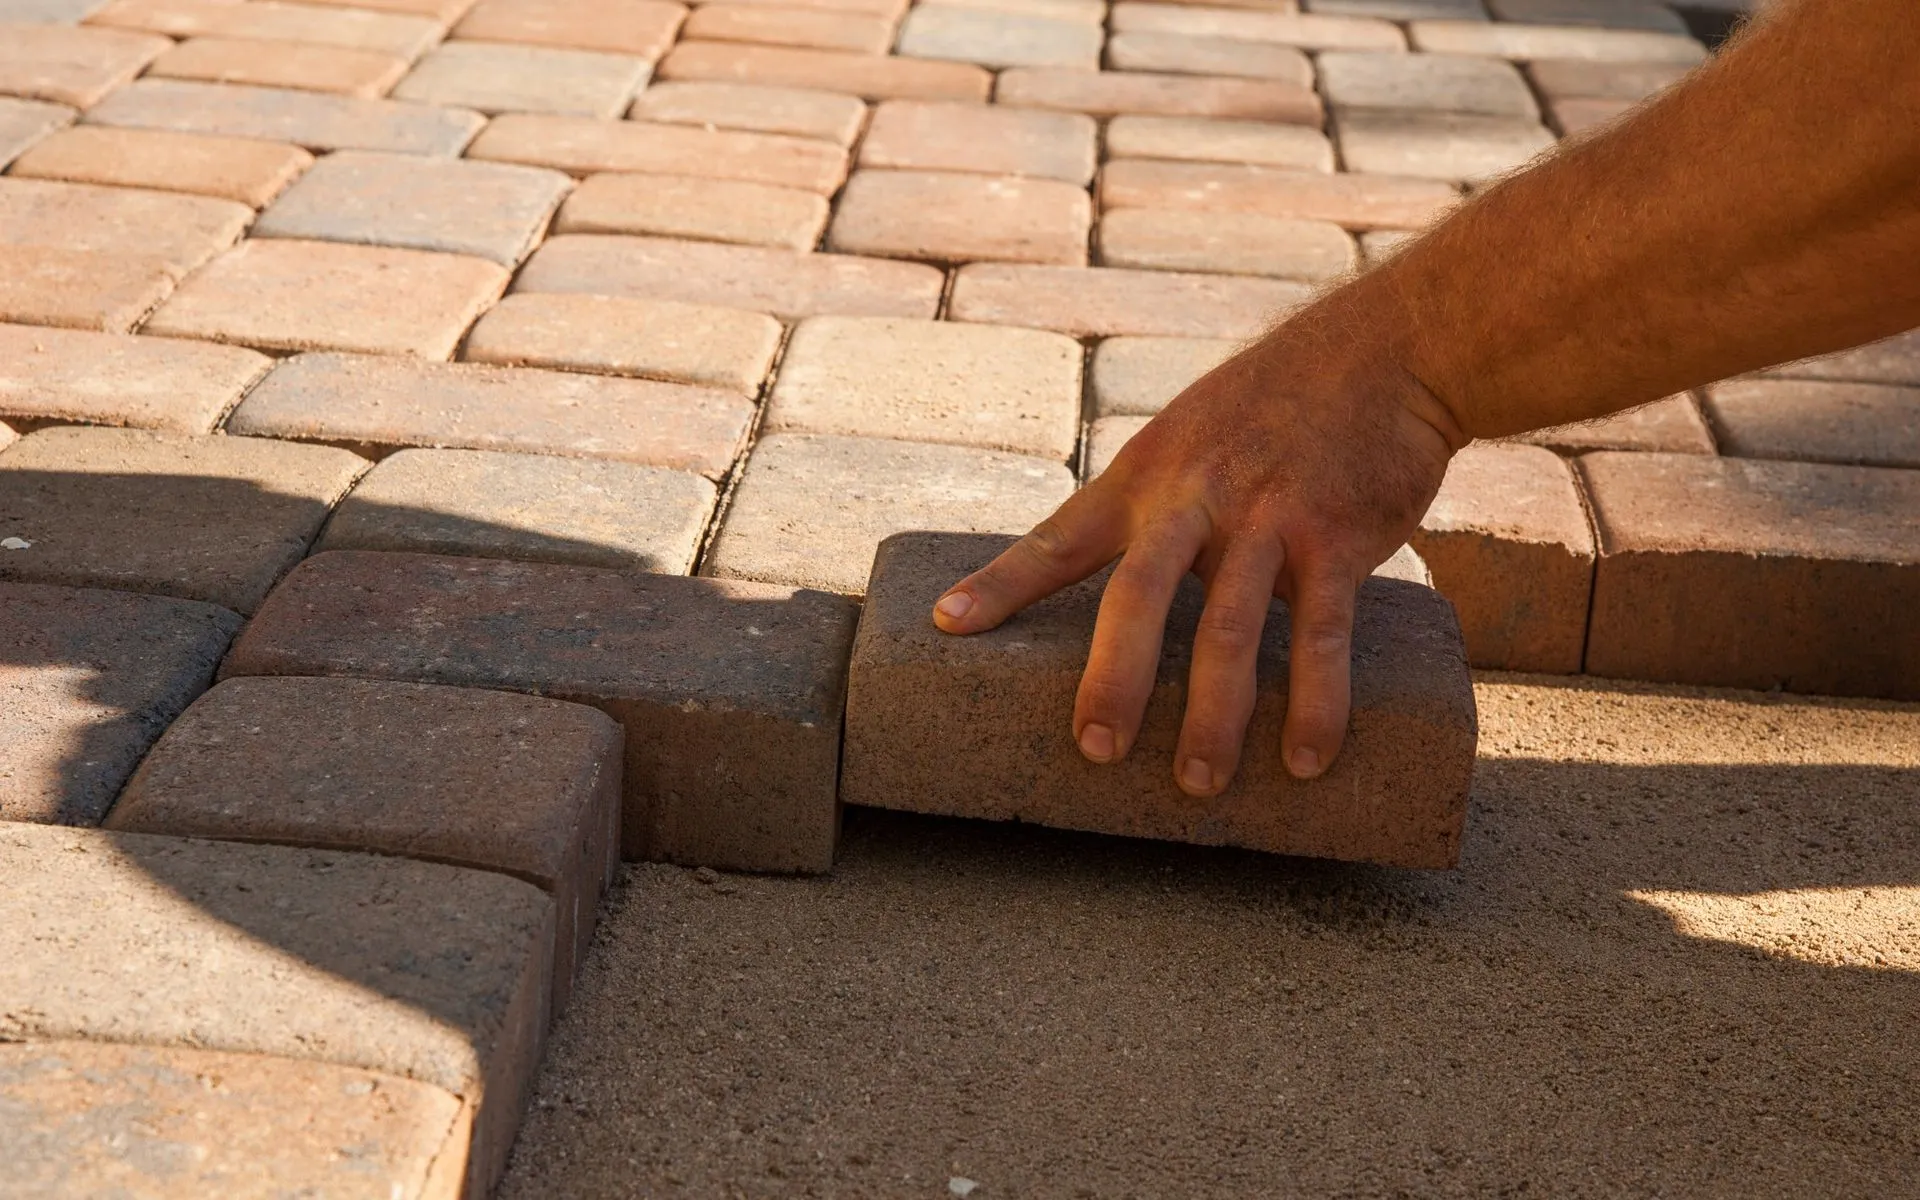 Close-up of a person's hand placing a rectangular brick onto a sand base, forming part of a neatly arranged brick pathway. The pathway, characteristic of meticulous paver installation in Scottsdale AZ, consists of uniformly aligned bricks in shades of red and brown.